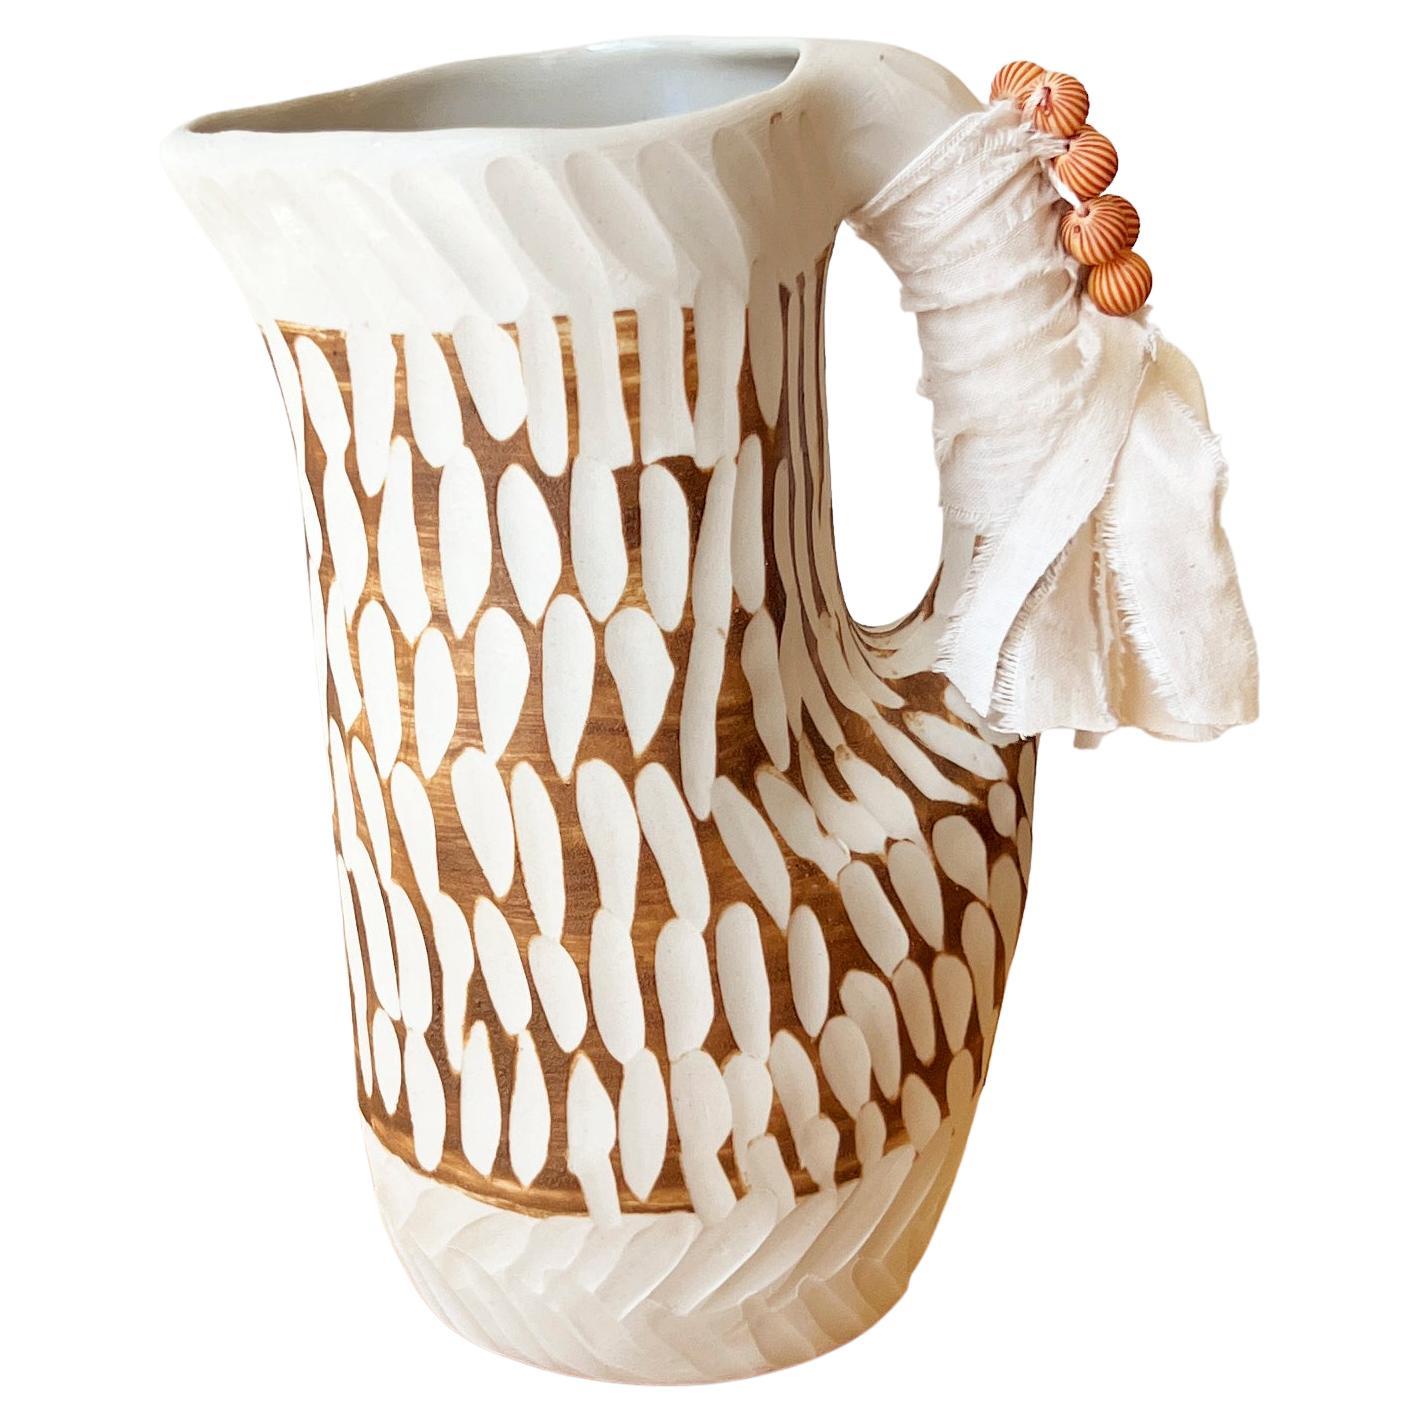 Terra Whimsical Handmade Ceramic Jug in Sienna and White w/ Fabric and Beads